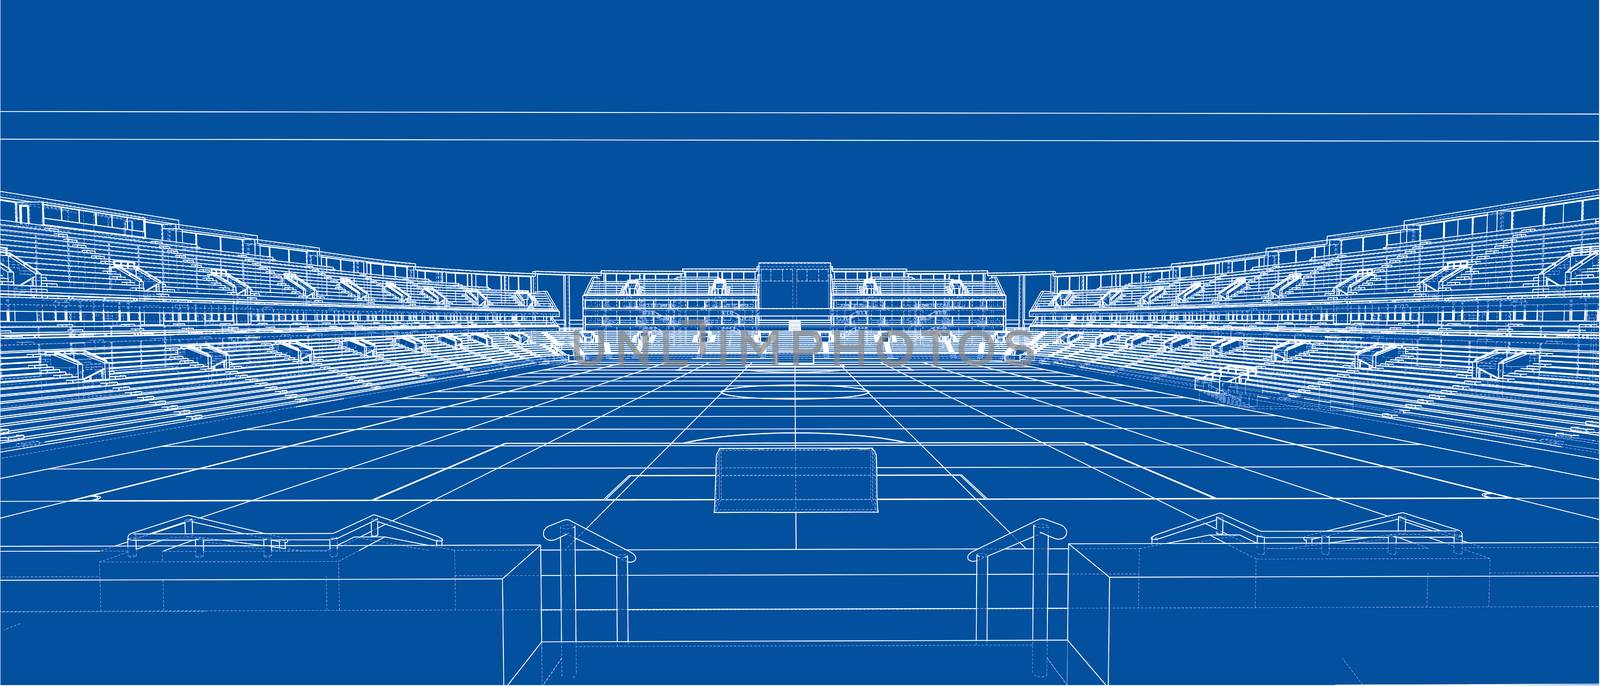 Sketch of Football stadium. 3d illustration. Wire-frame style